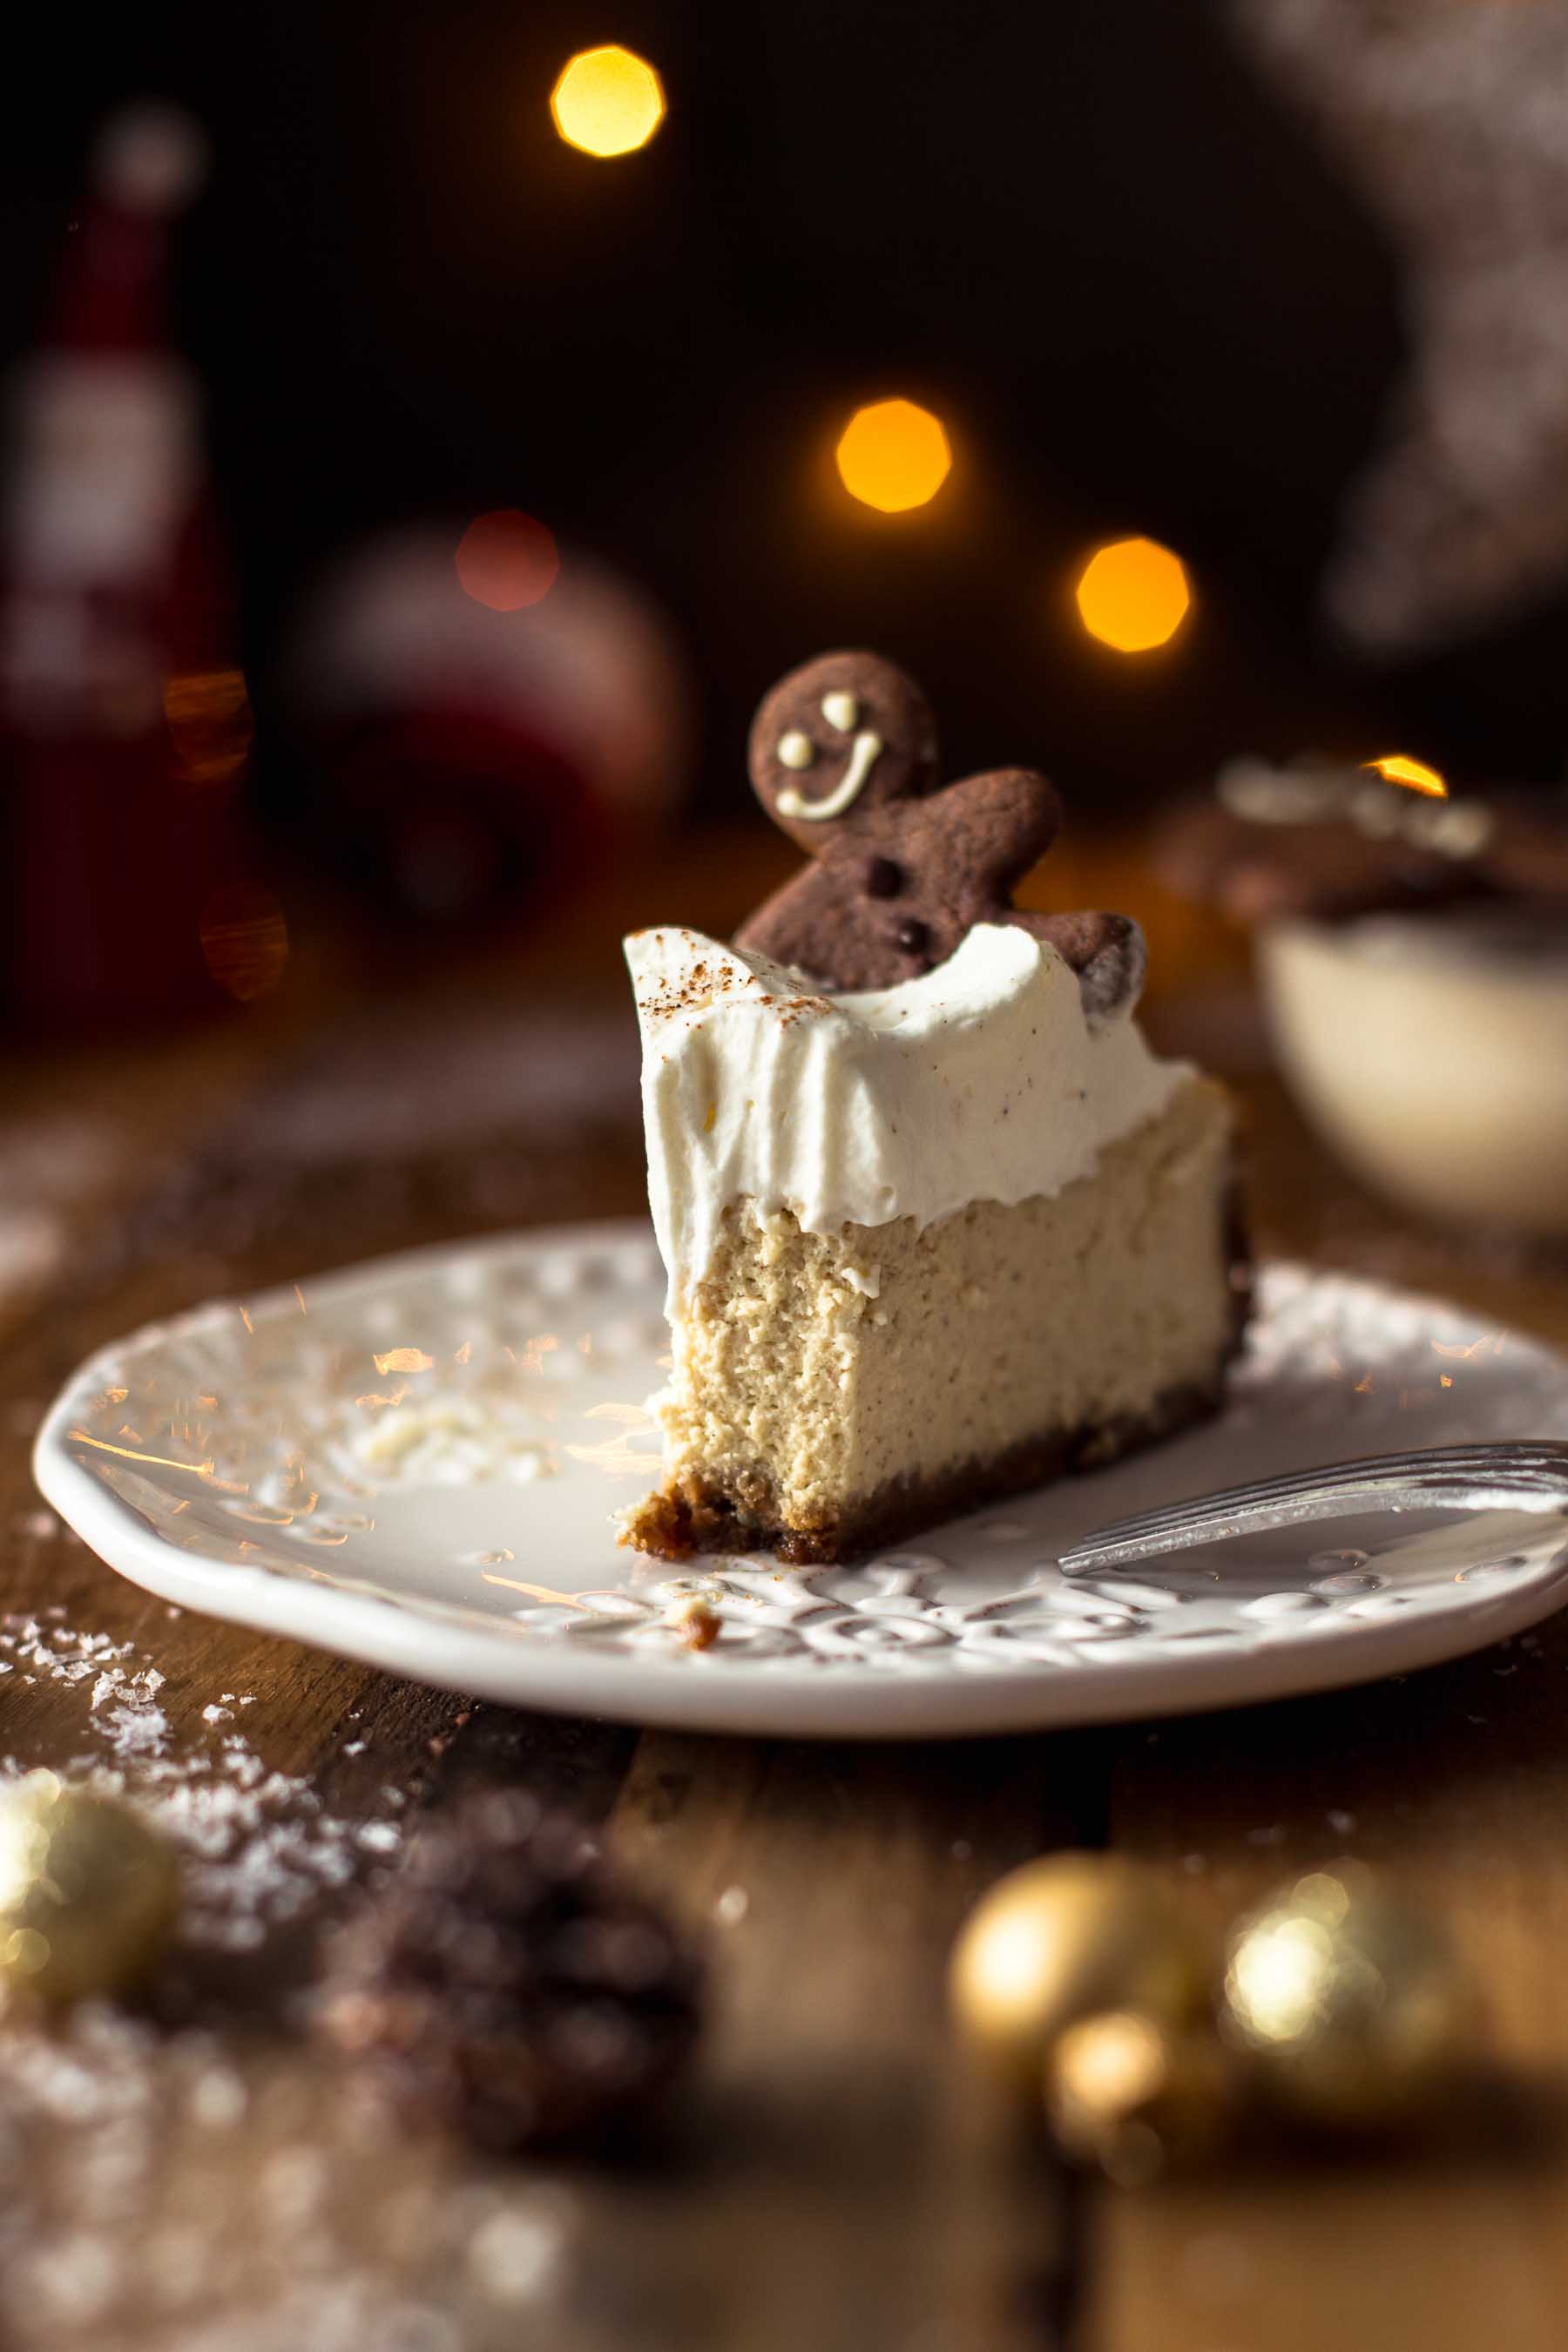 A slice of Baked Eggnog Cheesecake with Gingerbread Crust with a bite